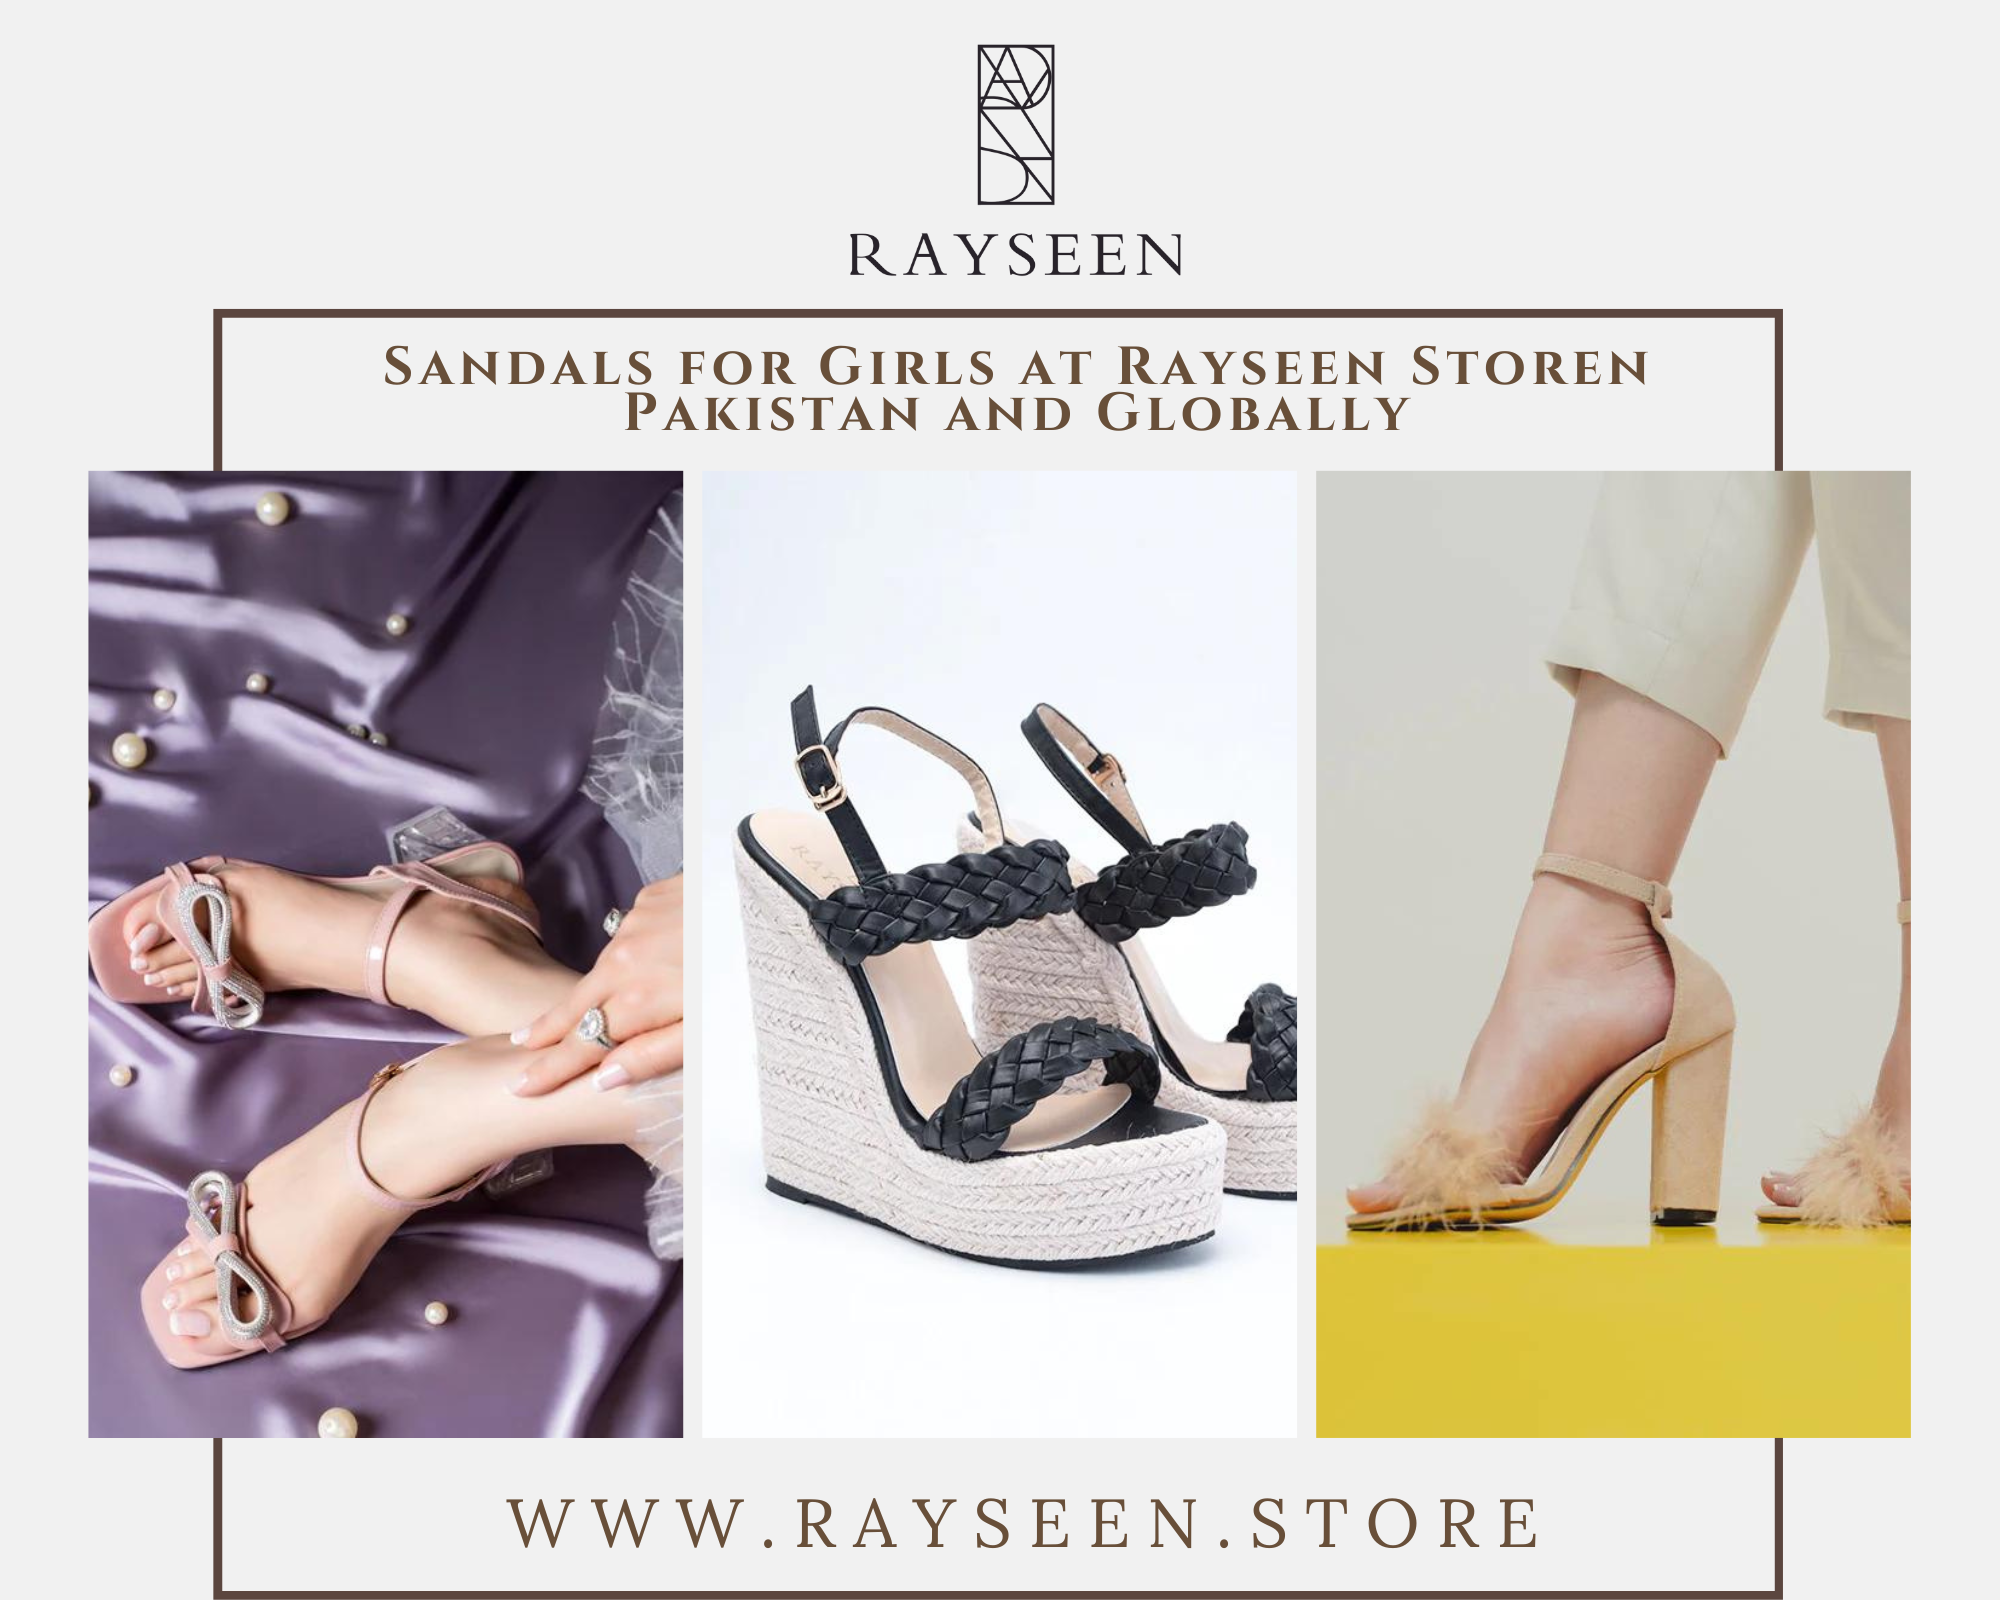 Sandals for Girls at Rayseen Store